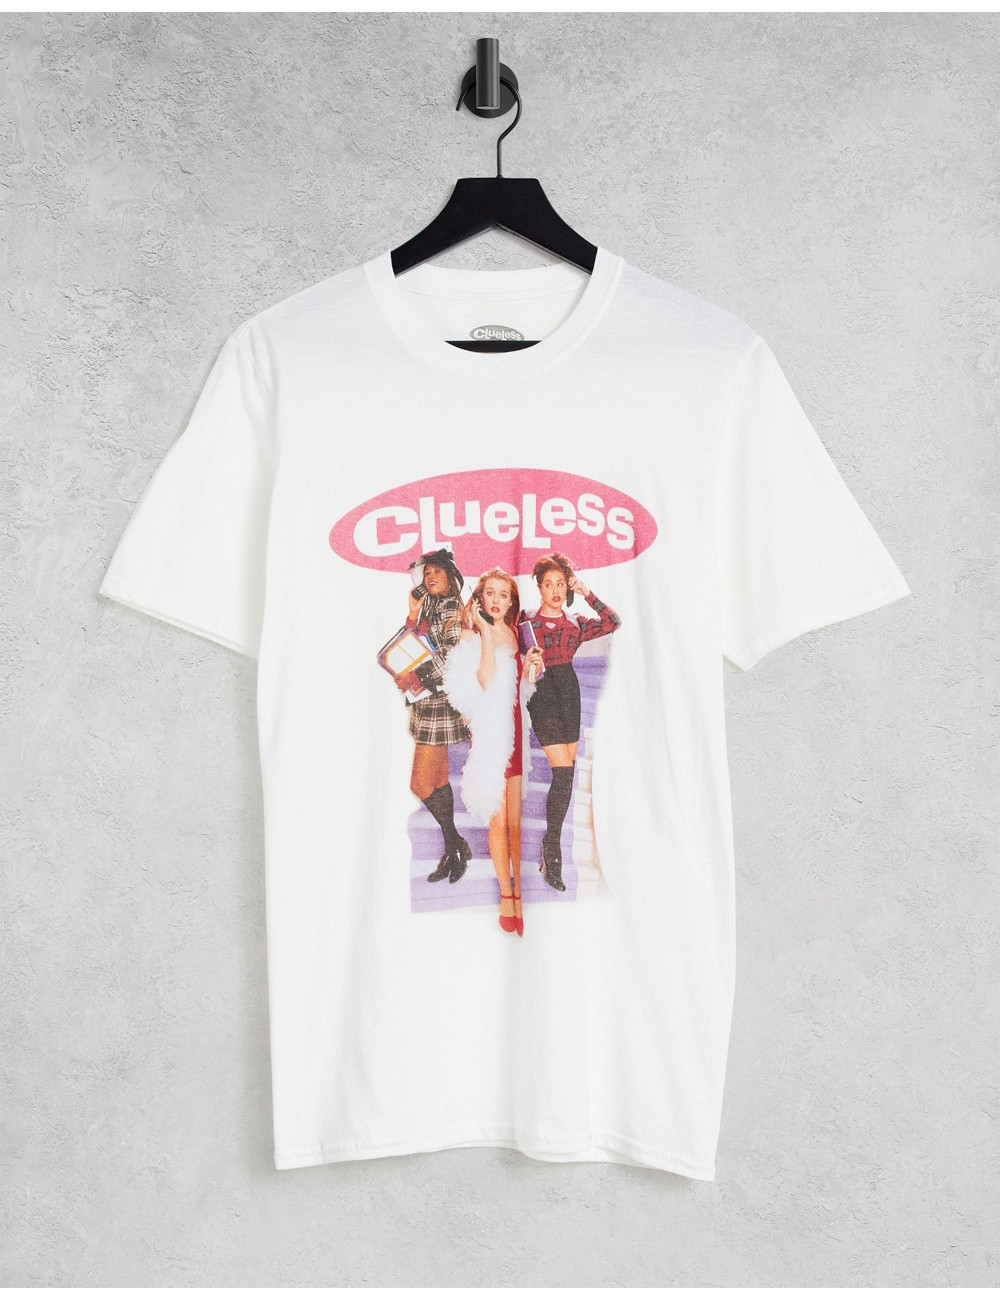 Clueless t-shirt in white